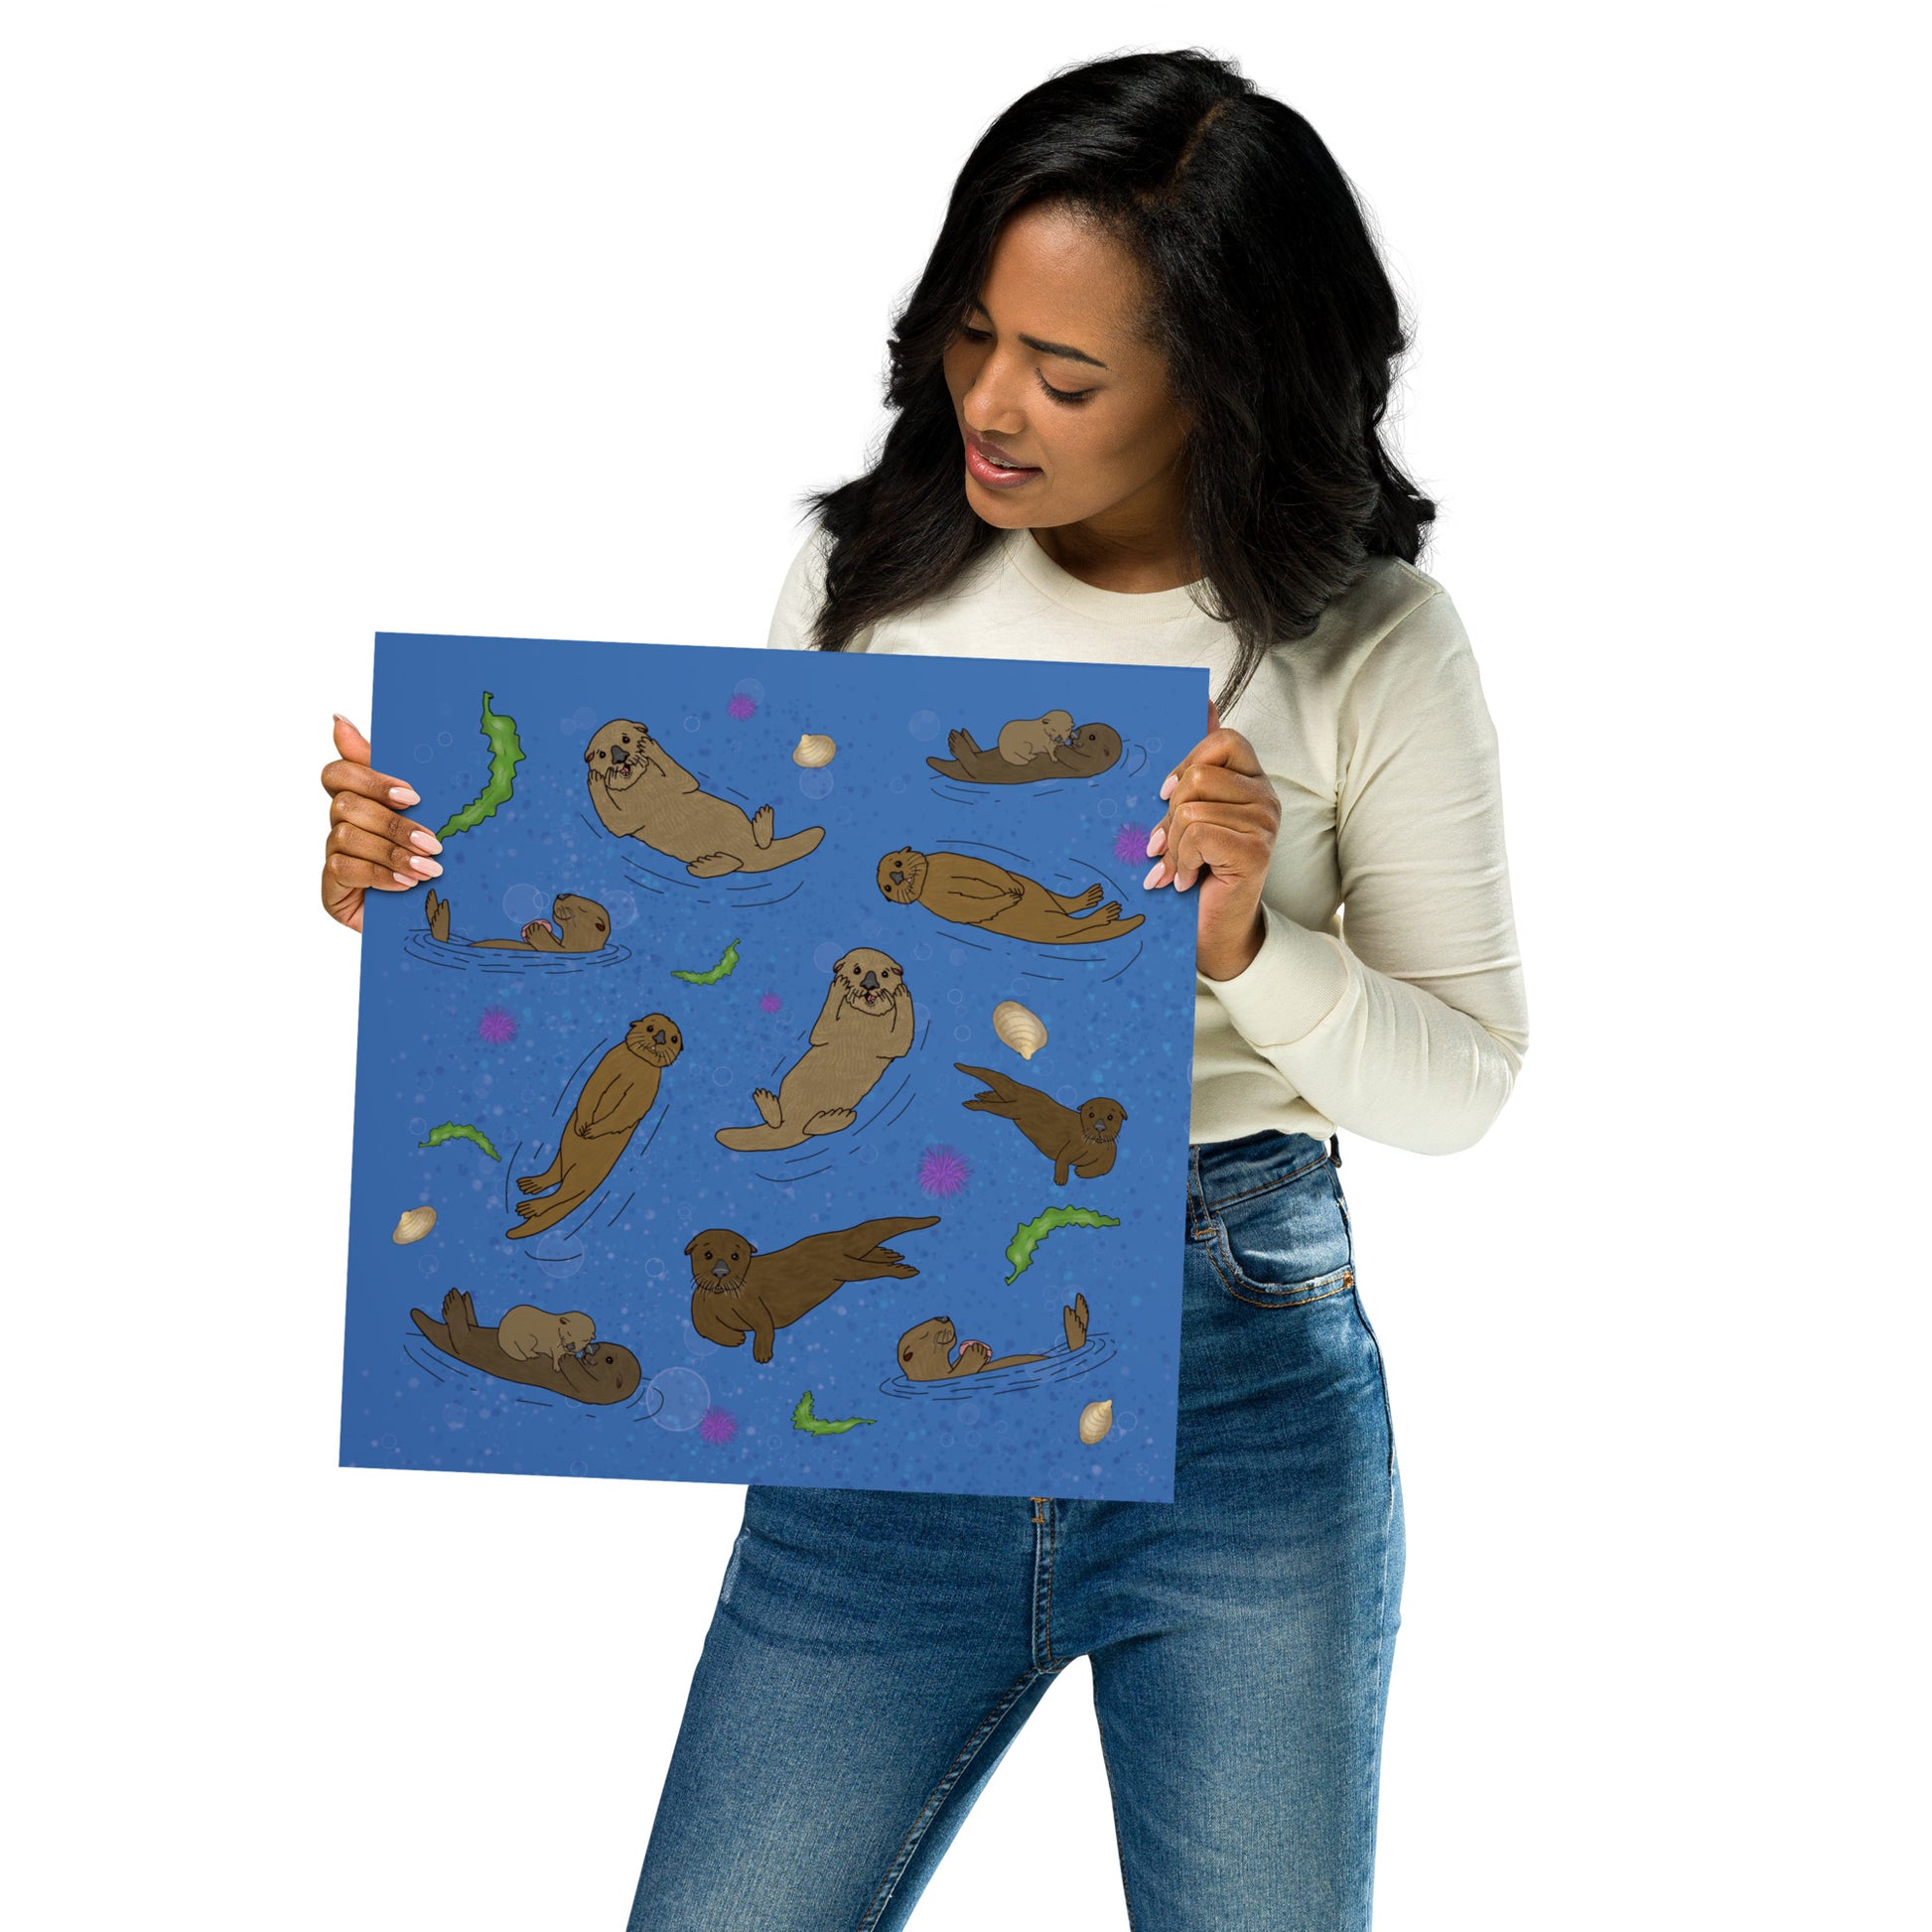 14 x 14 inch matte poster art print. Hand illustrated digital drawing of cute sea otters with accenting seashells, seaweed, and sea urchins on a blue background. Shown in female model's hands.